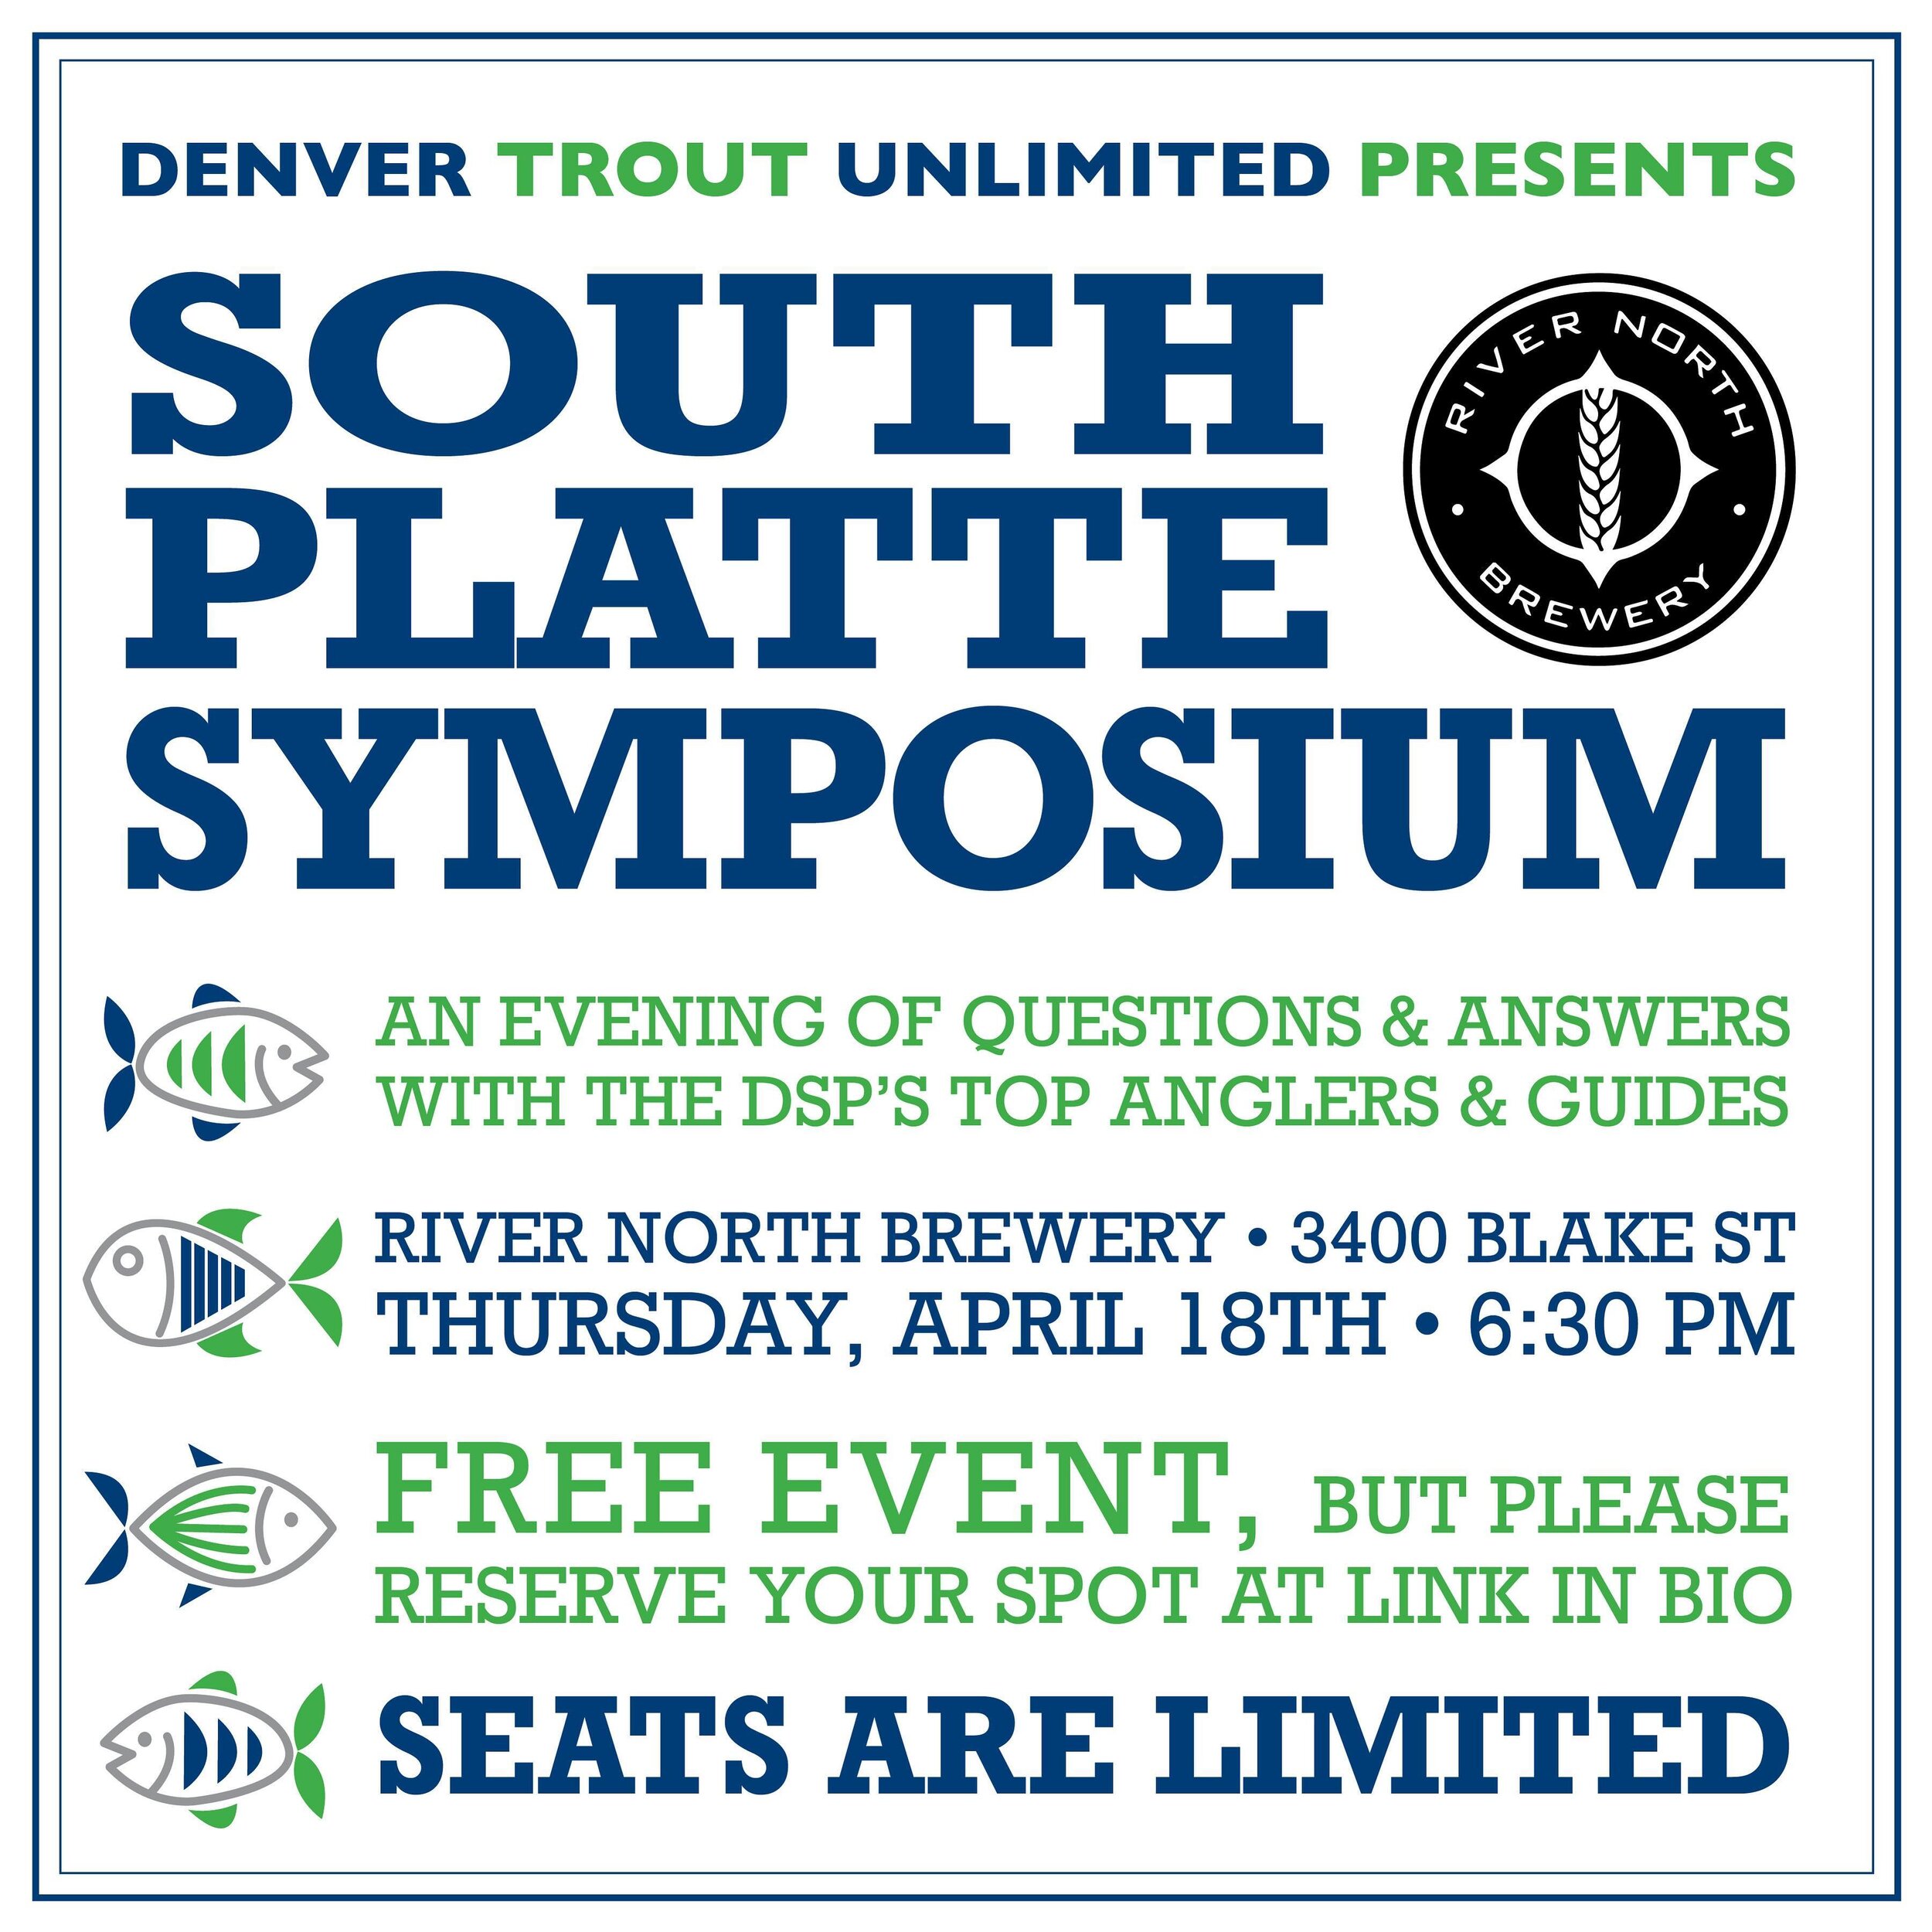 Coming up April 18th at @rivernorthbrew 🤘
Join DTU for an evening of Q&amp;A on fishing techniques and different species for the DSP with the top anglers and guides in town! FREE event. Reserve your spot through link in bio.
#protecttheplatte